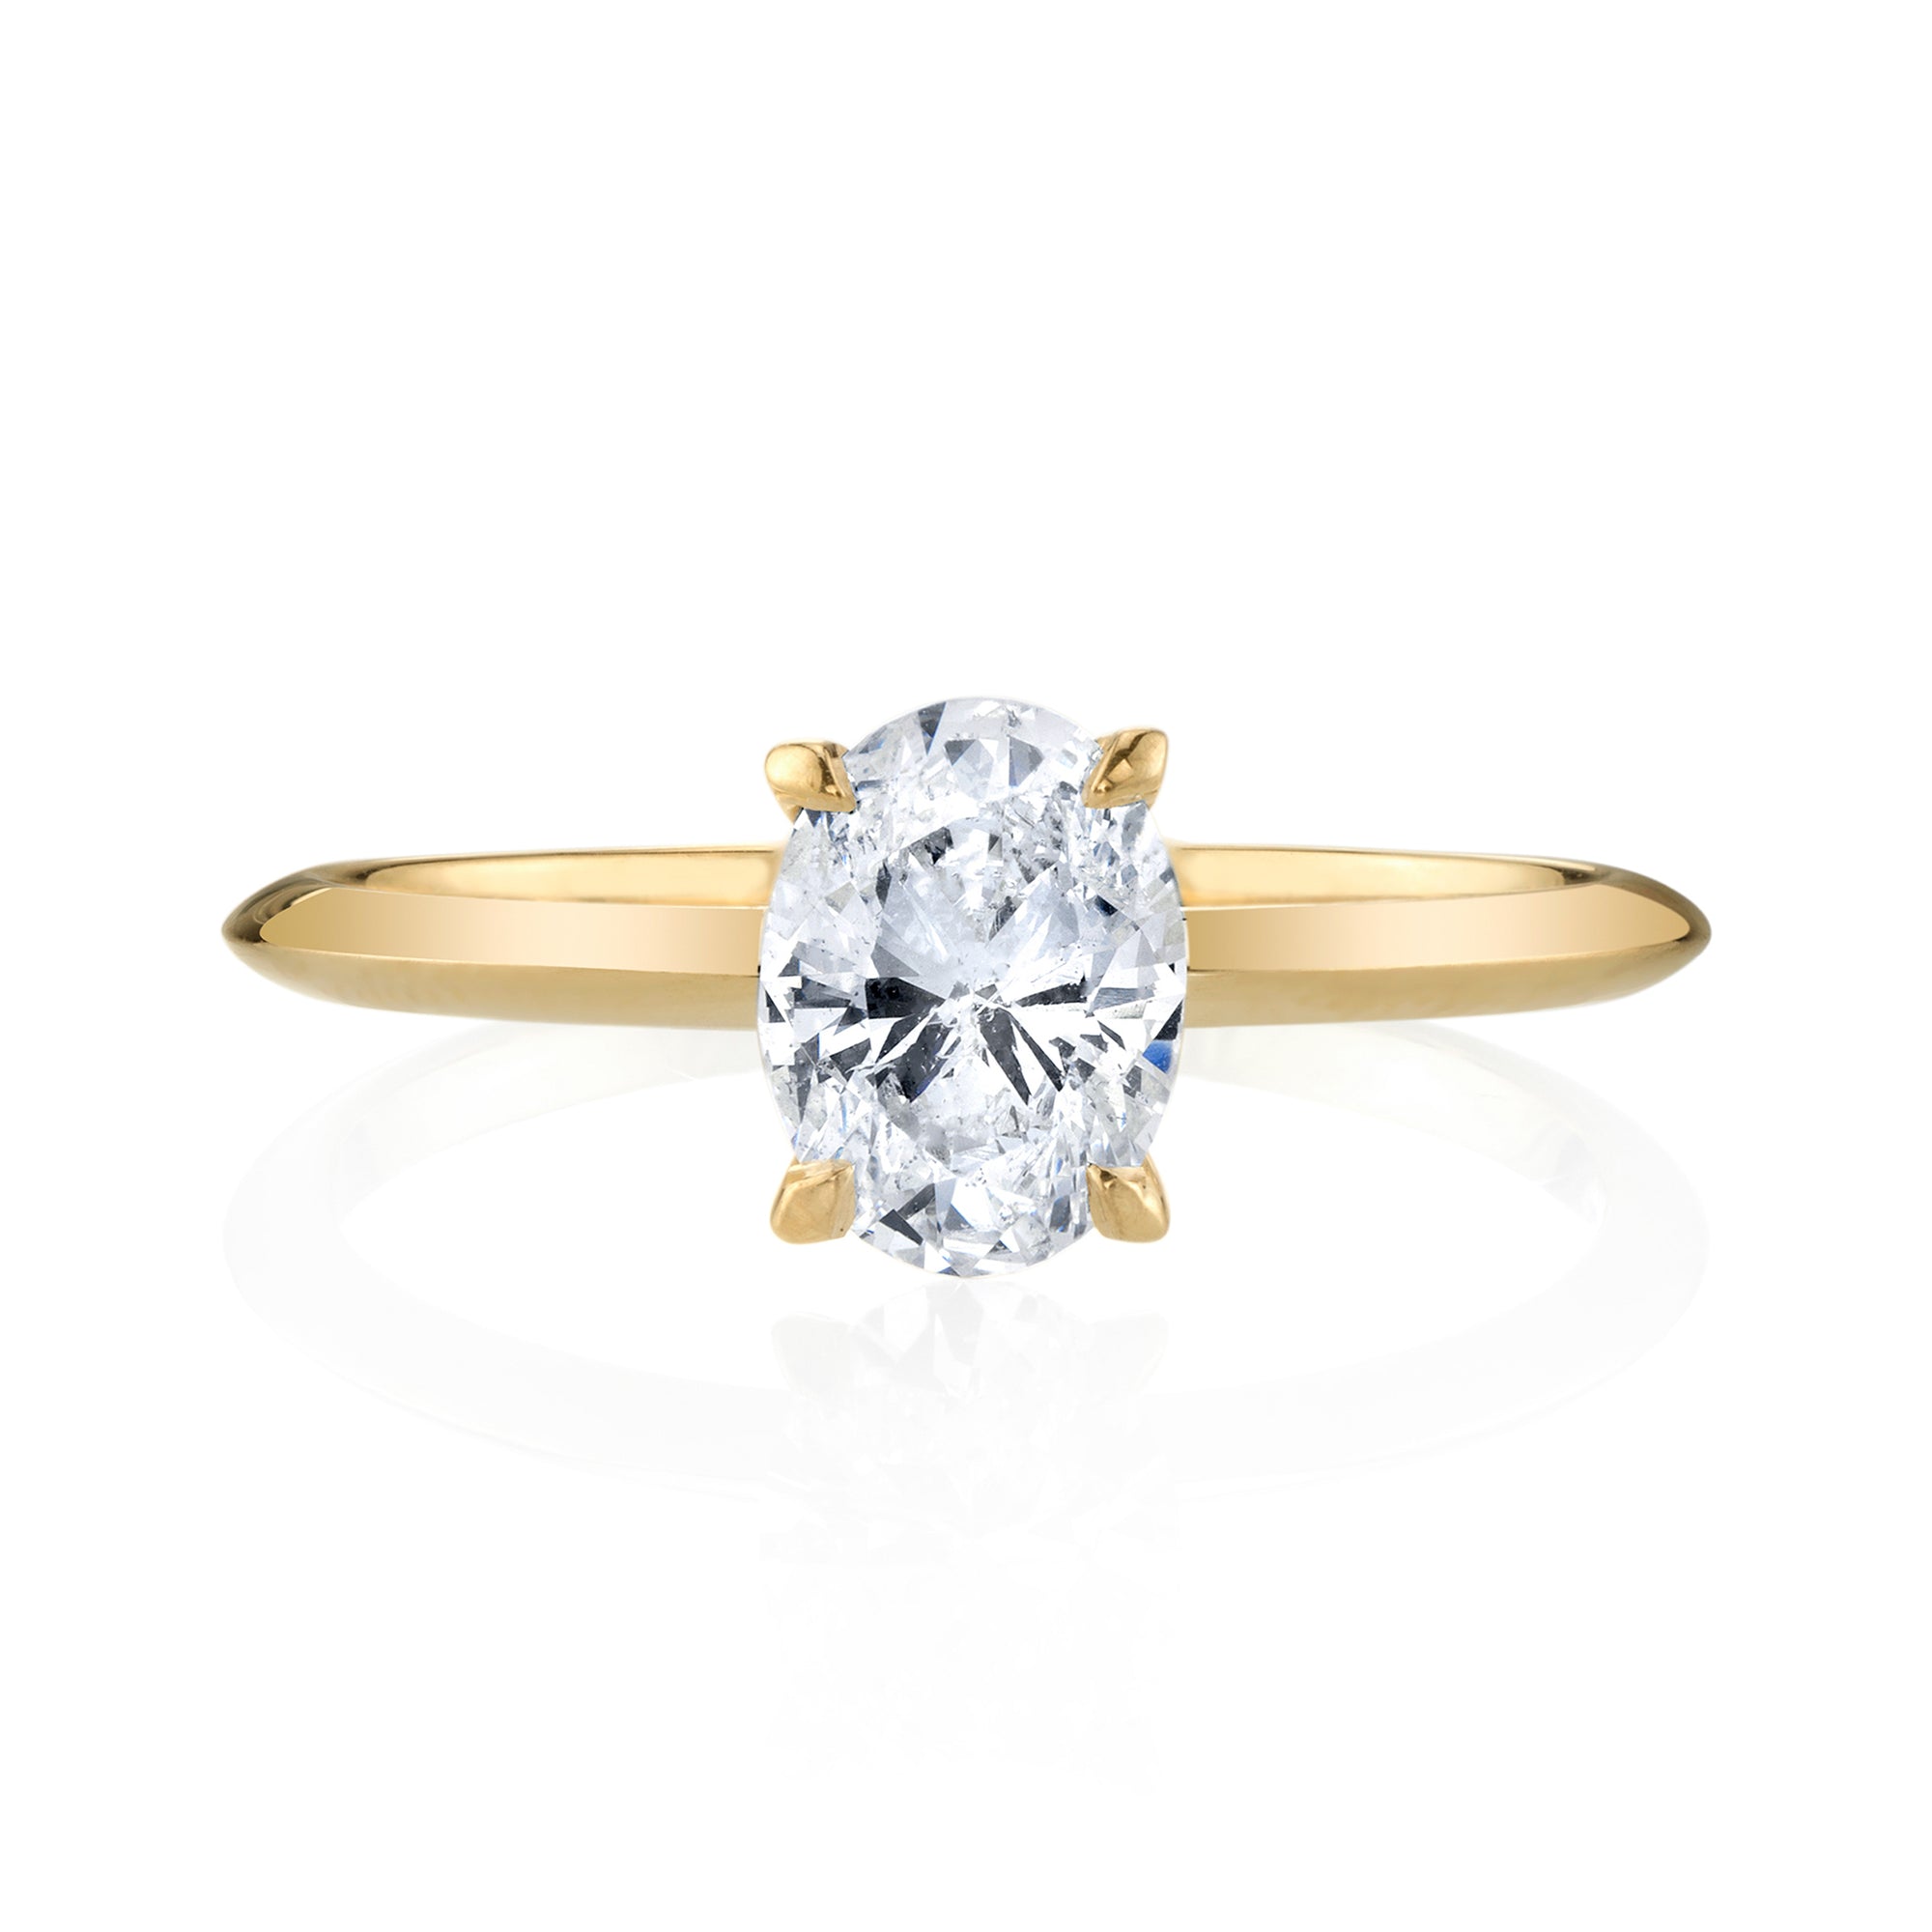 Oval Diamond with Signature Knife Edge Solitaire Band